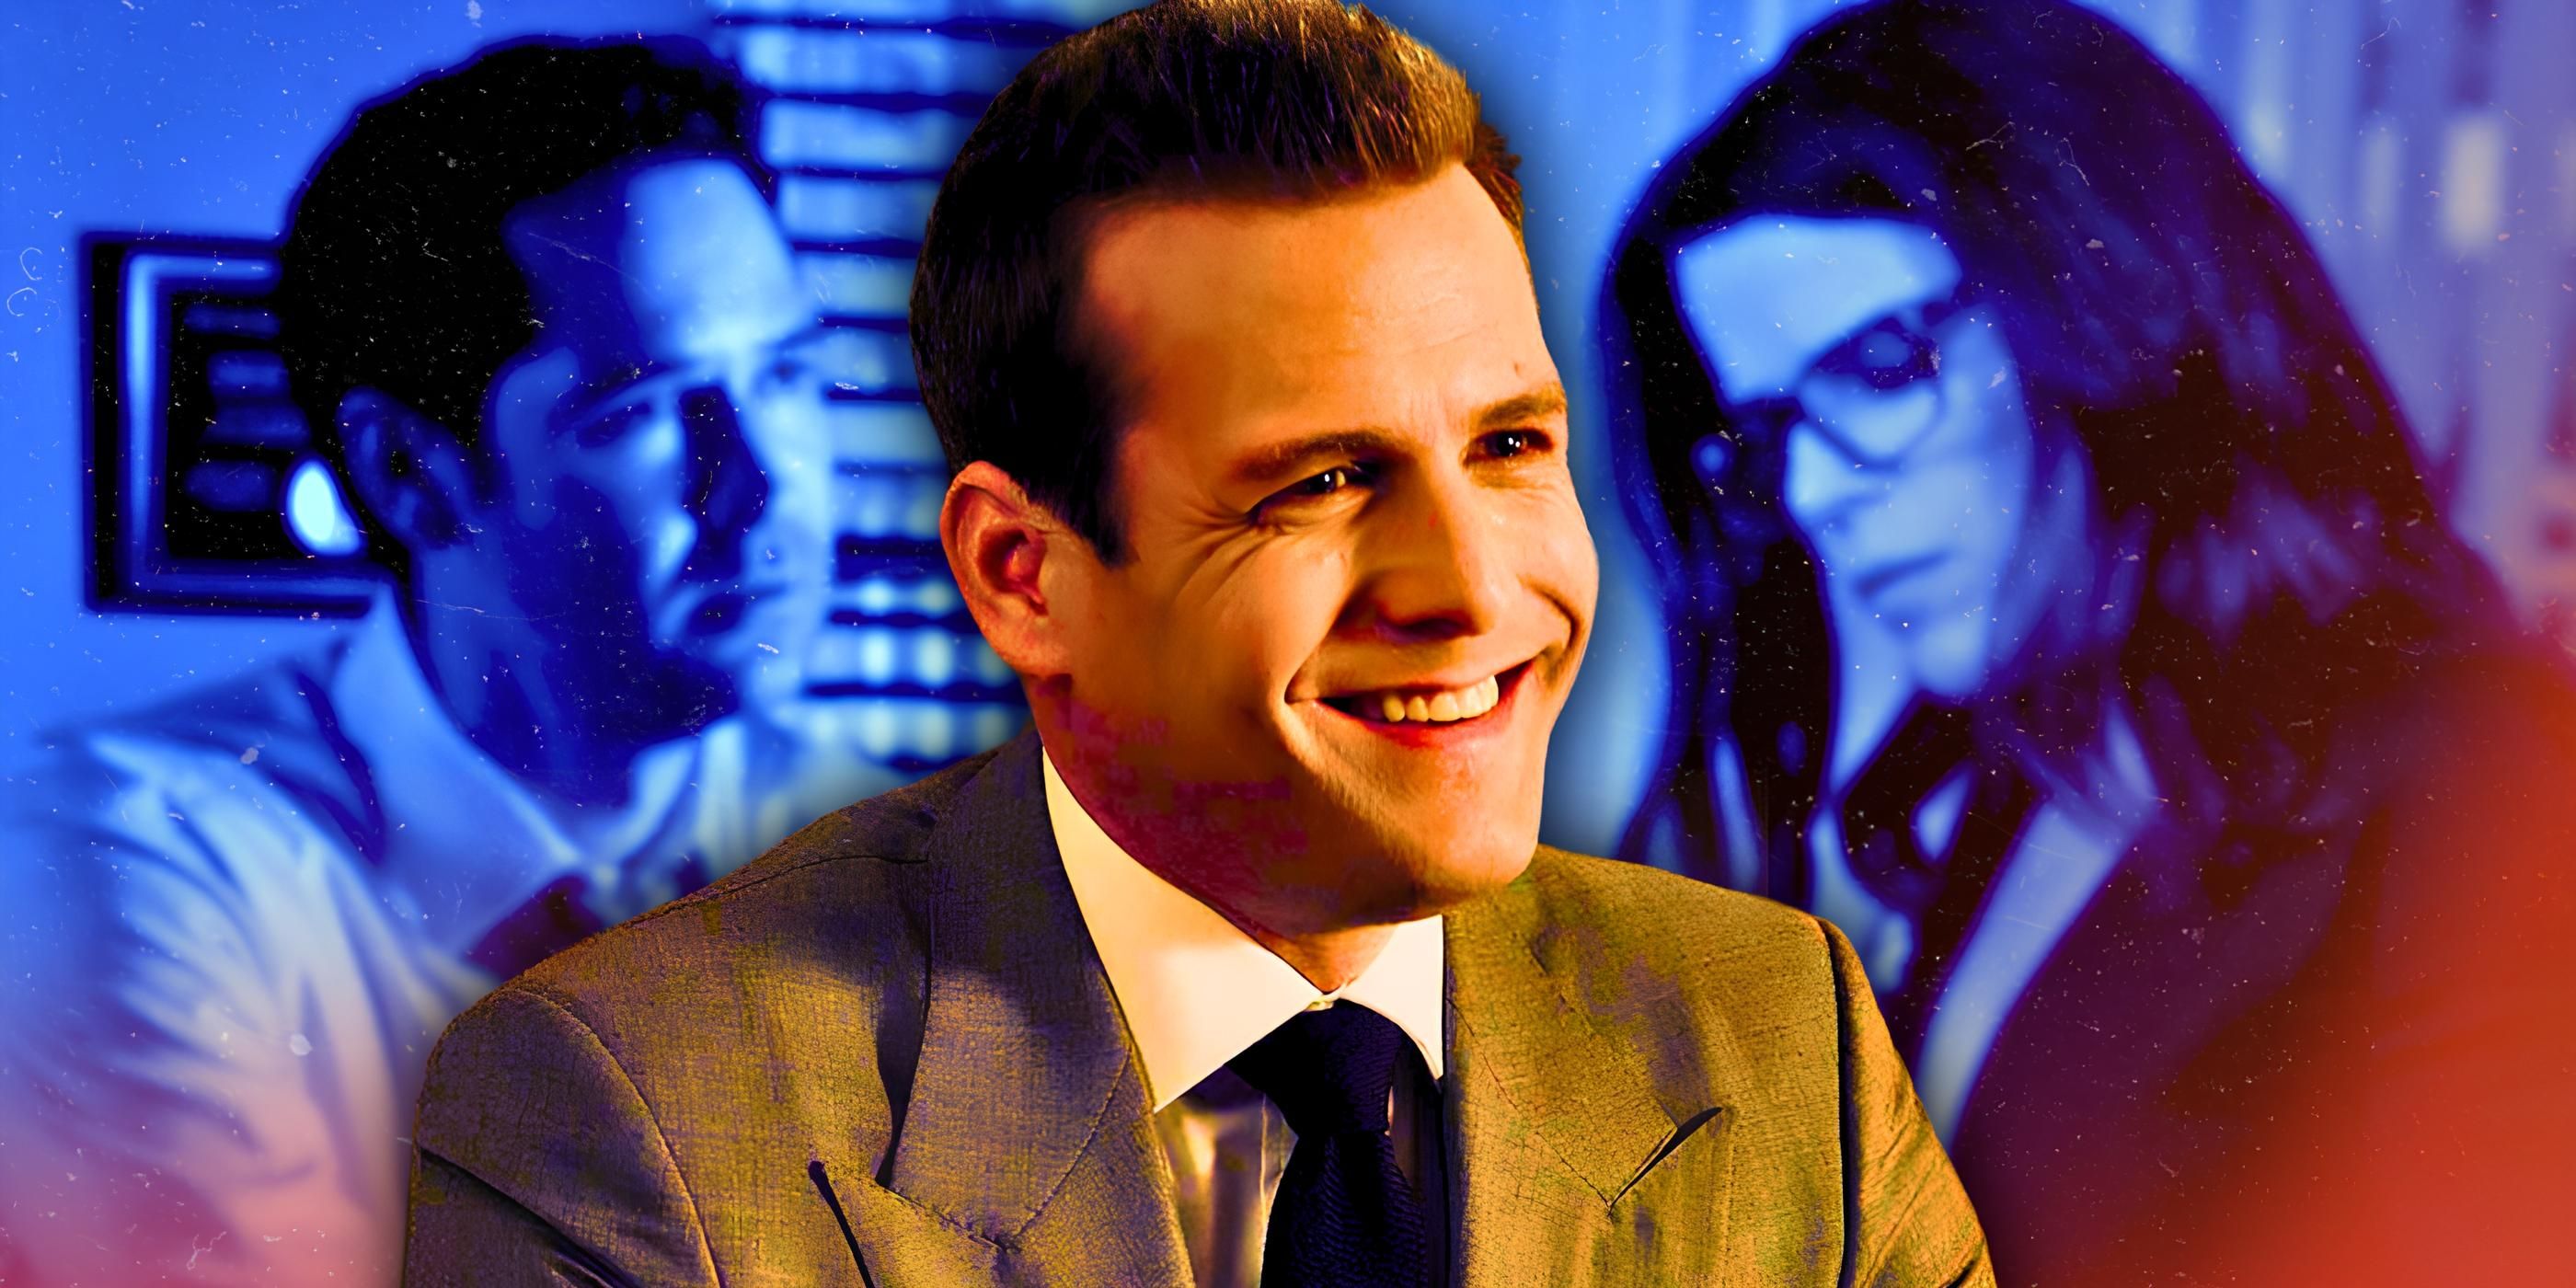 Gabriel Macht as Harvey in Suits in the center with Mickey Haller and Maggie McPherson from The Lincoln Lawyer blurred in the background